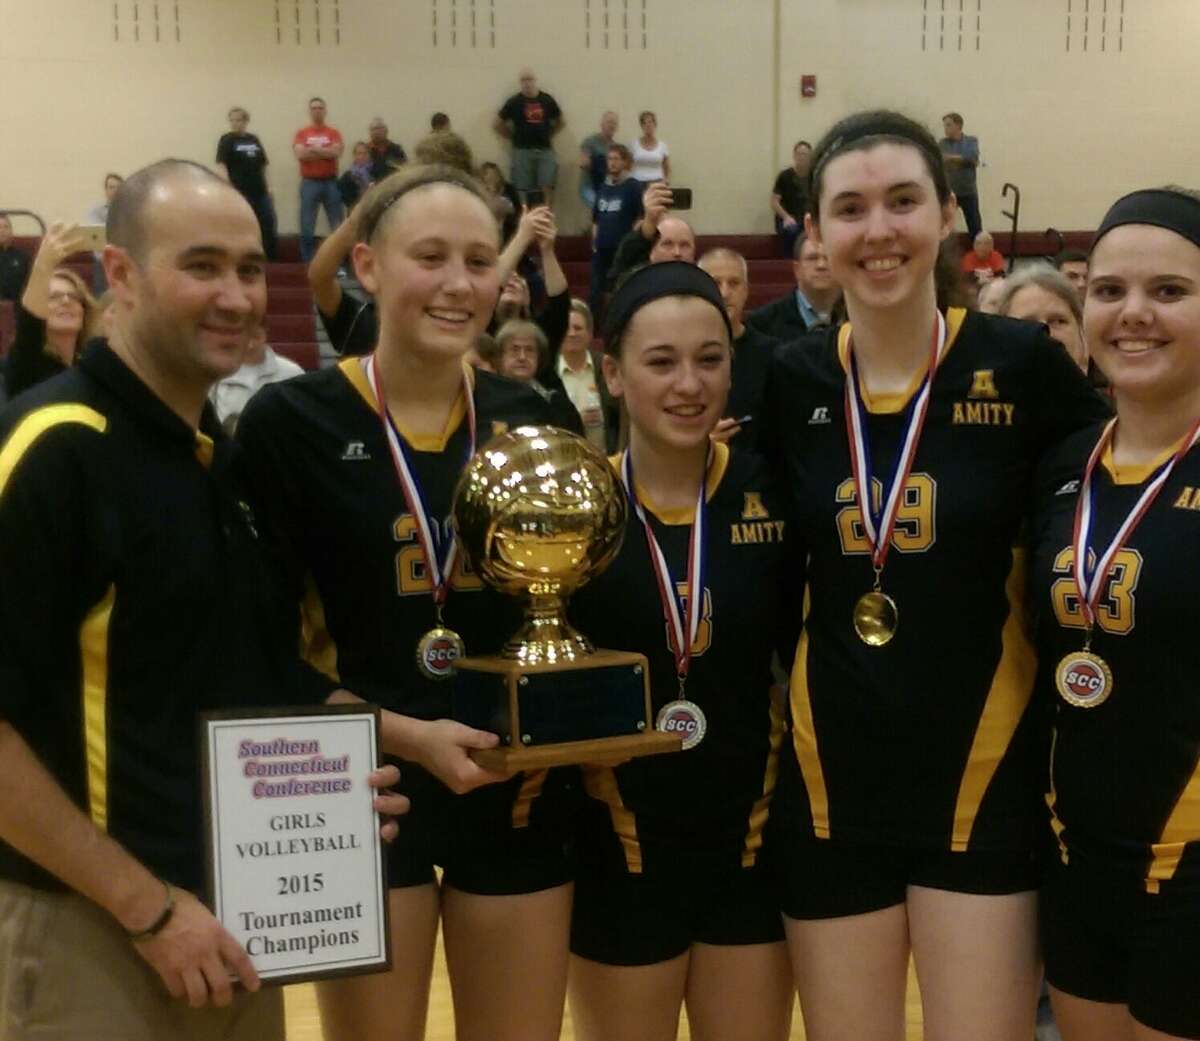 Amity coach Seth Davis, Micaela Cardozo, Cassidy Kirby, Katriana Helfenbein and Karalyn Kachmar (left to right) pose with the Southern Connecticut Conference tournament trophy after defeating Cheshire 3-2 Friday at North Haven High School.